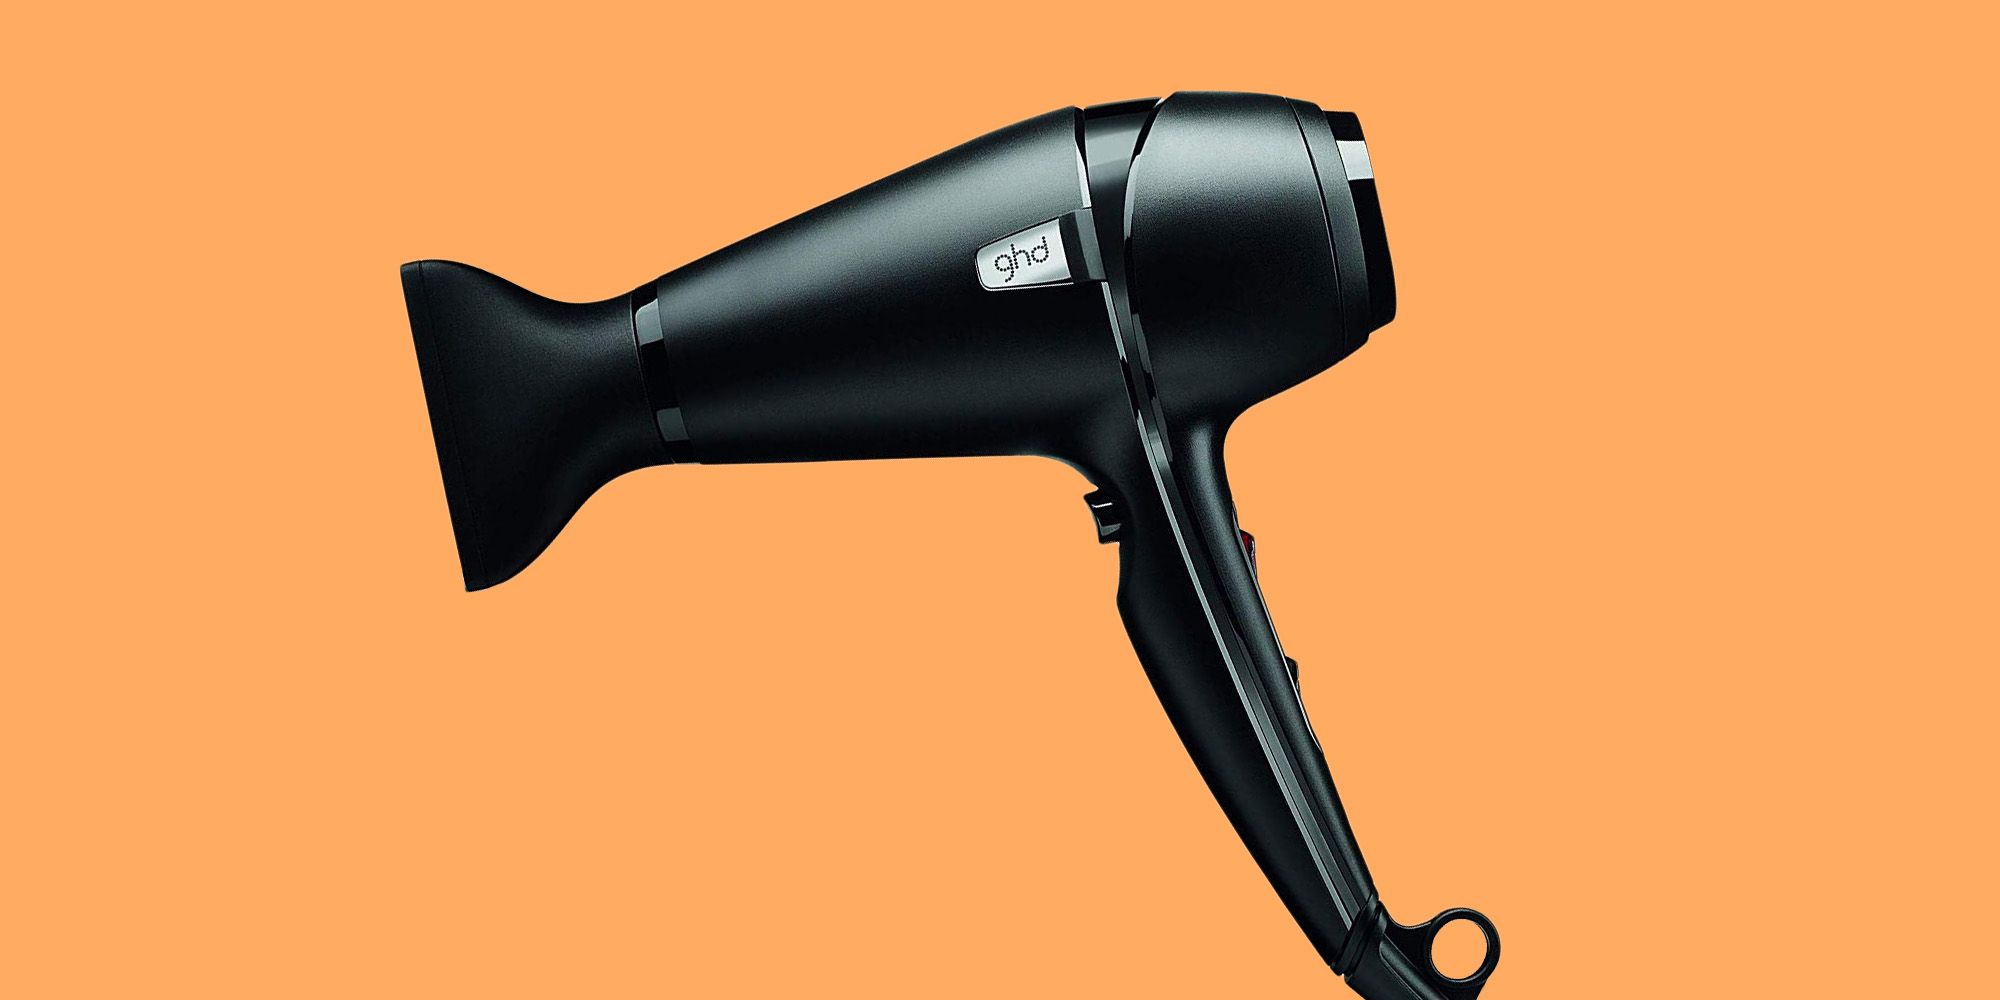 The ghd Air hair dryer Prime Day deal you don't want to miss